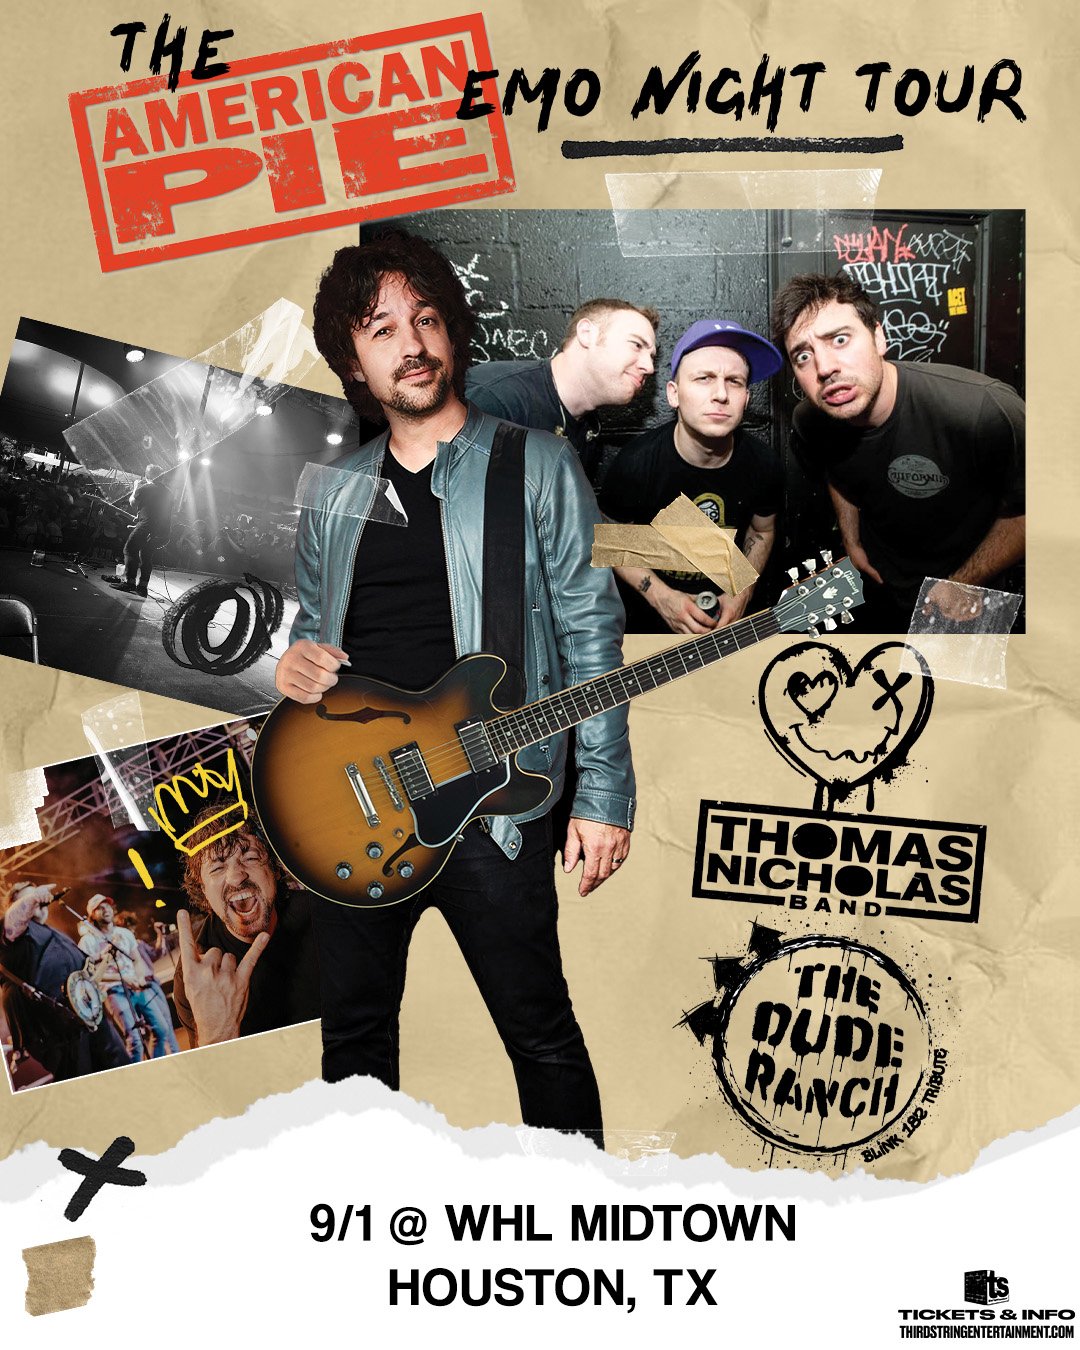 Special Announcement 🥧 The @americanpie Emo Night Tour is coming to Houston on Sunday, September 1st to celebrate its 25th Anniversary ft. a panel, performances by @tinband @theduderanchnyc, and a DJ set!

Tickets on sale Fri 5/31 @ 10AM 🎟️
For mor